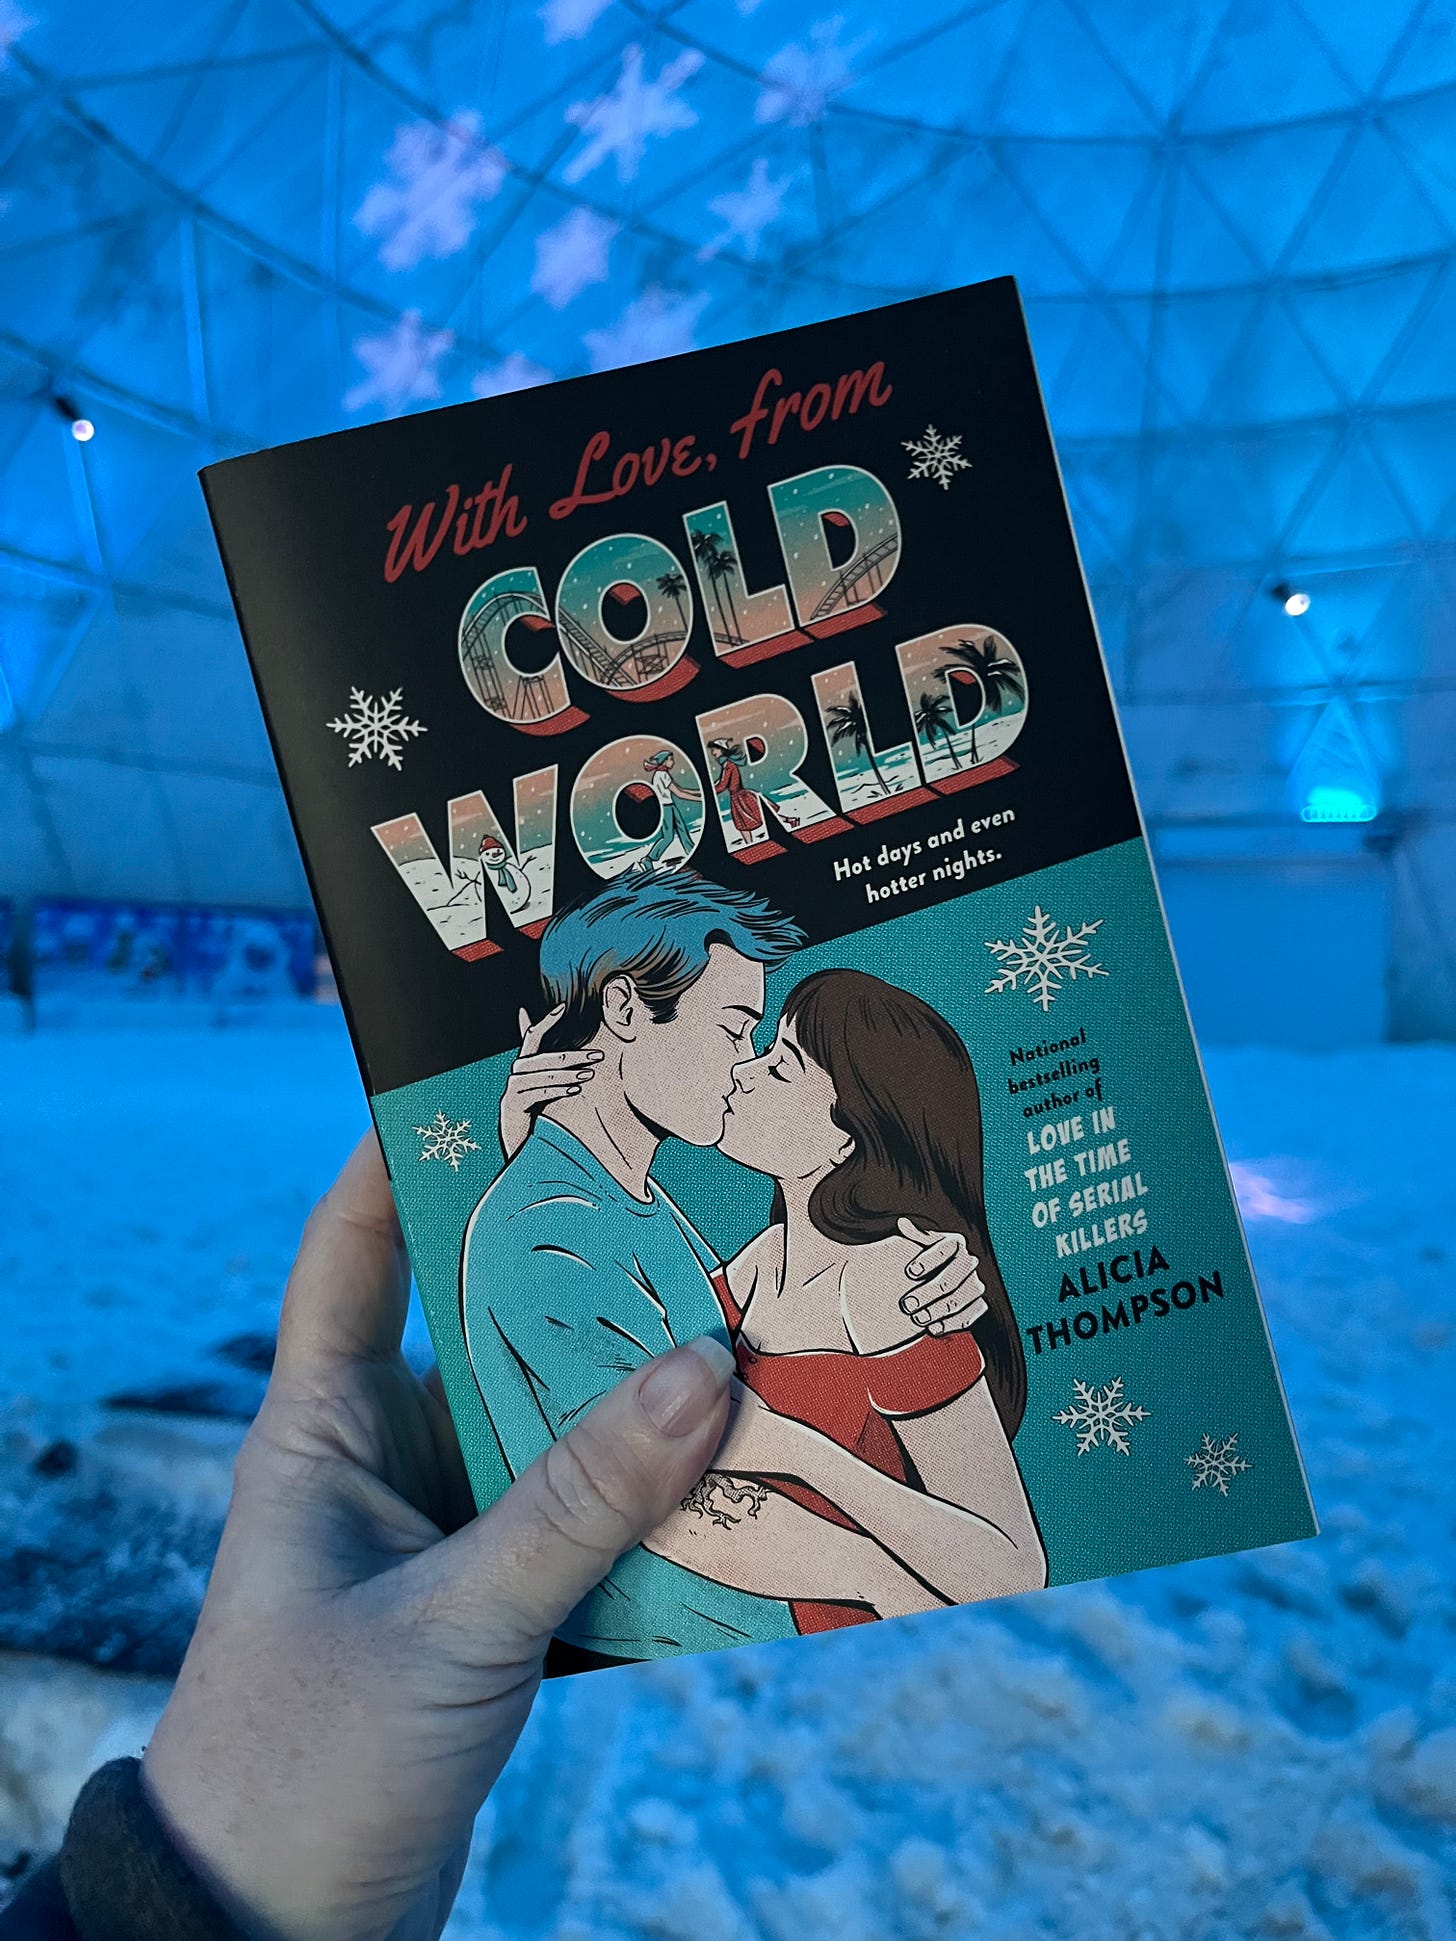 Picture of my hand holding up the teal cover copy of WITH LOVE, FROM COLD WORLD in the Igloo, which is a self-contained area with fake snow